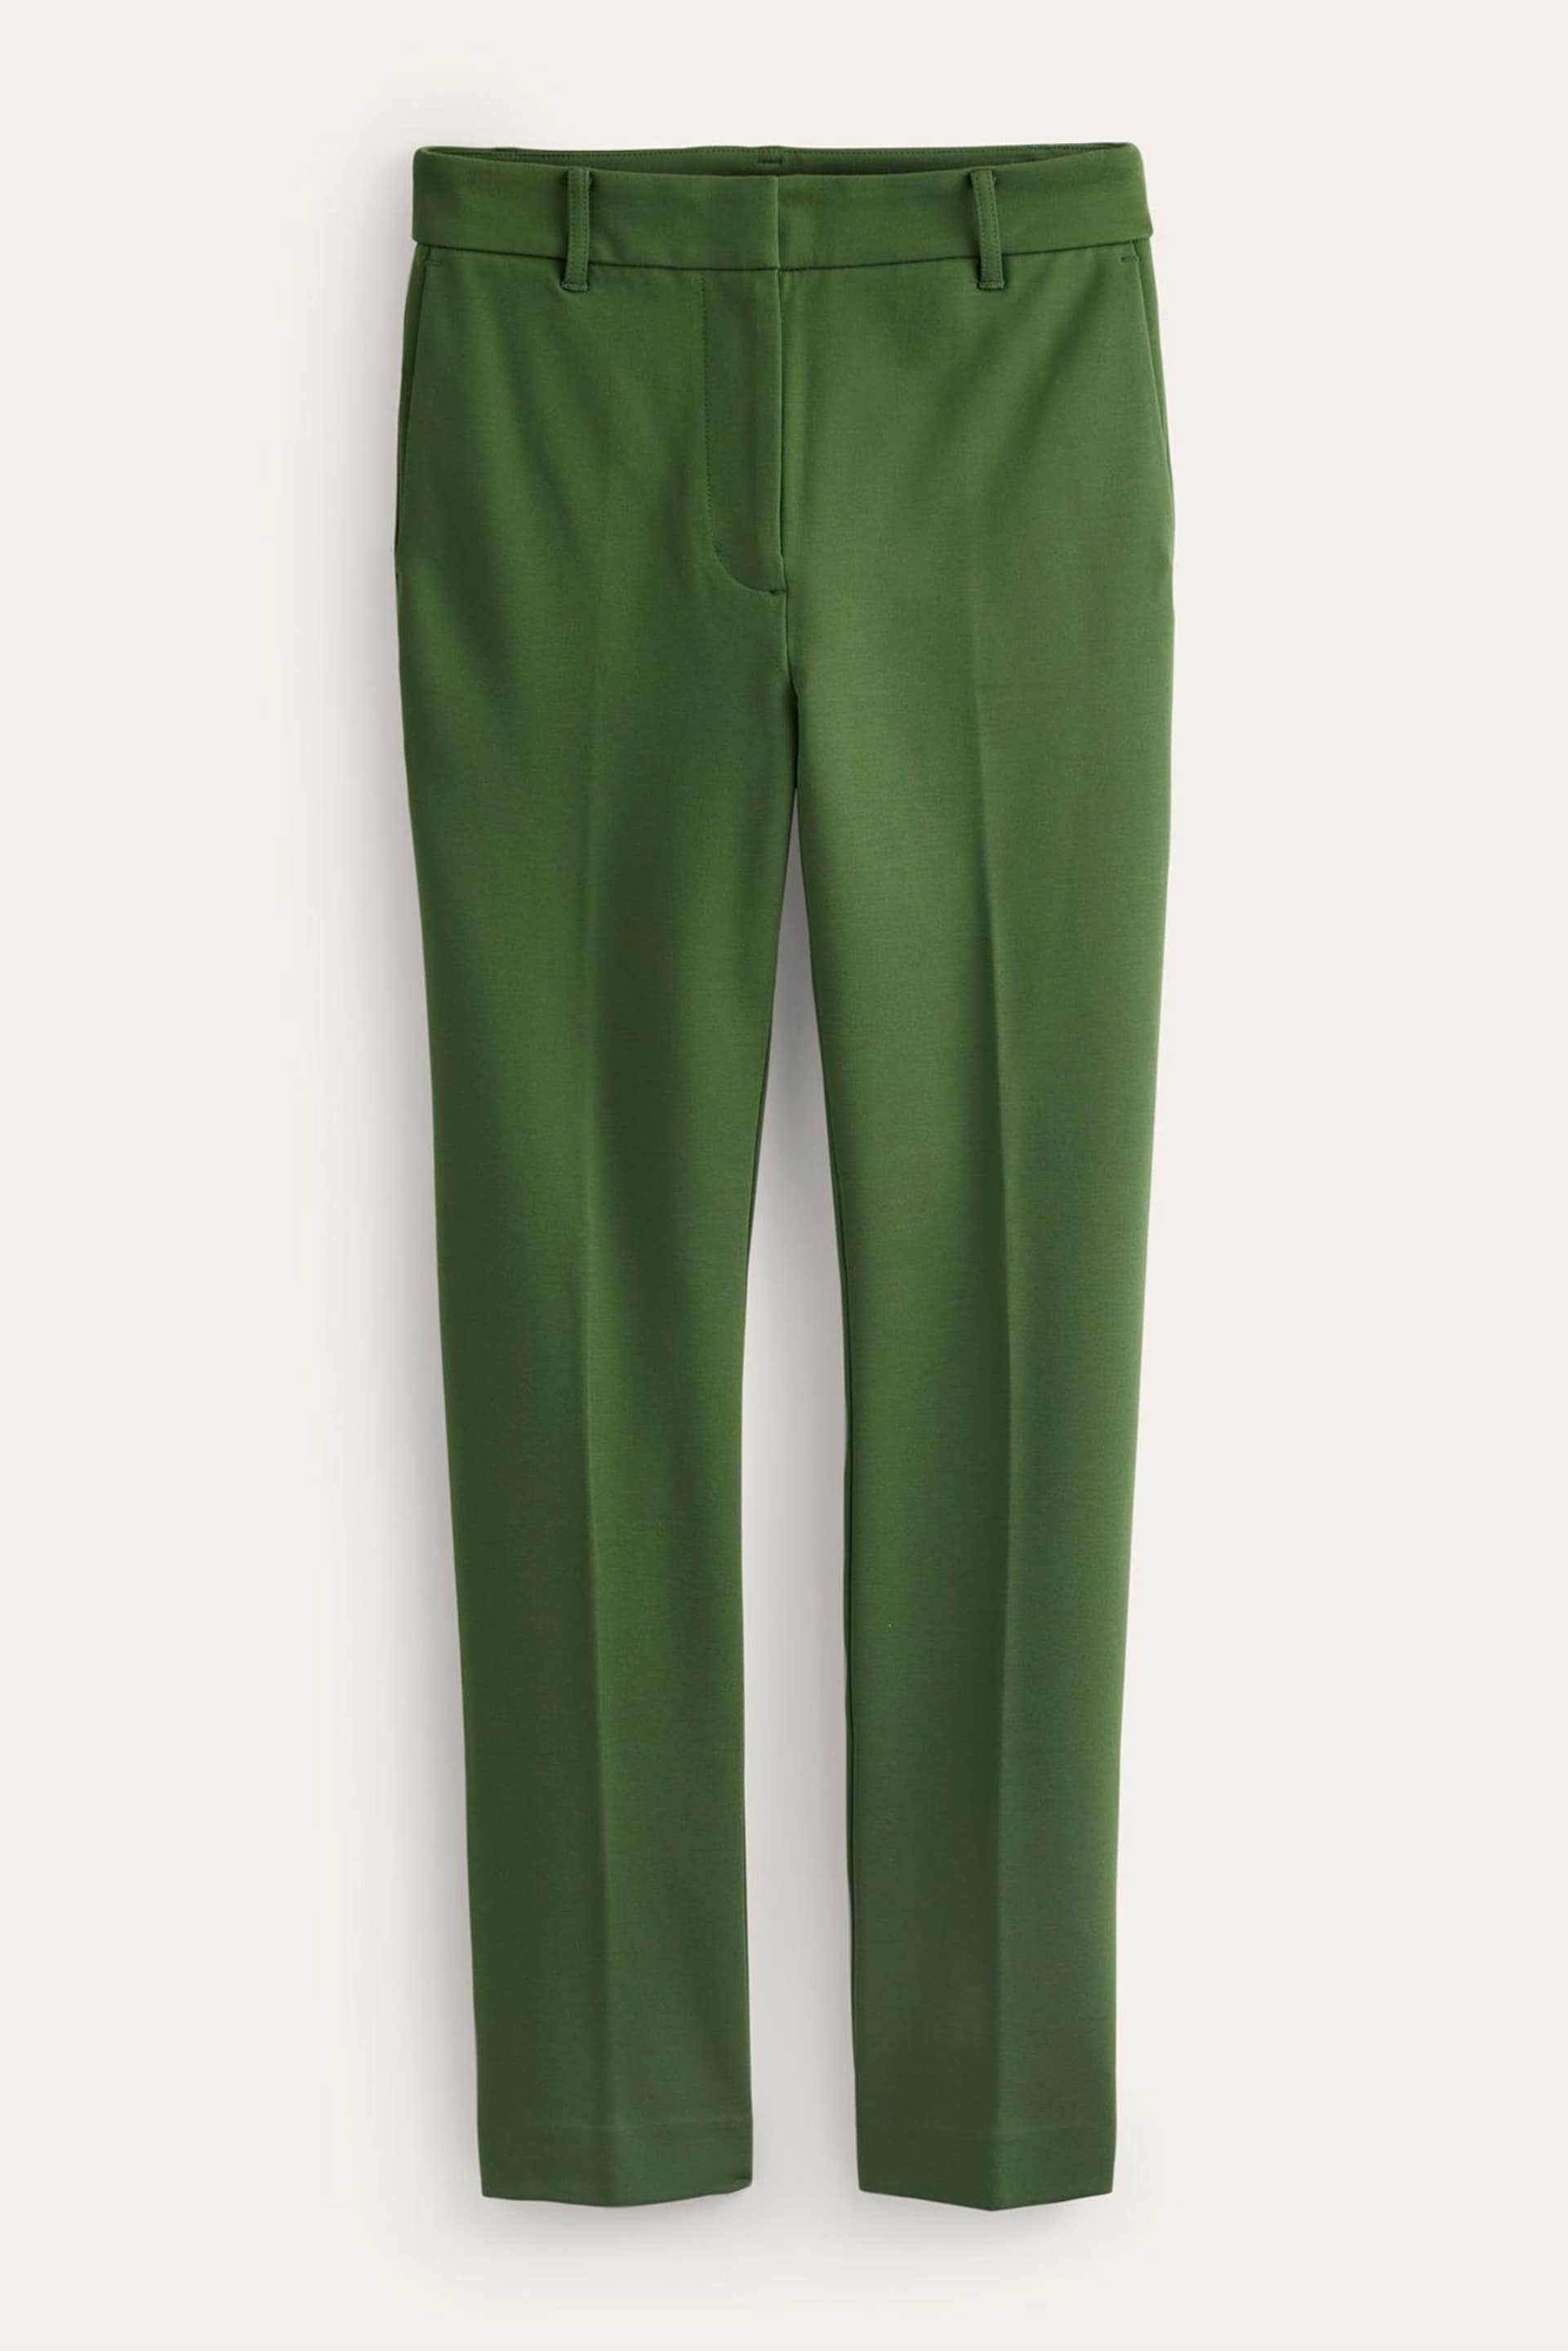 Boden Green Highgate Ponte Trousers - Image 5 of 5